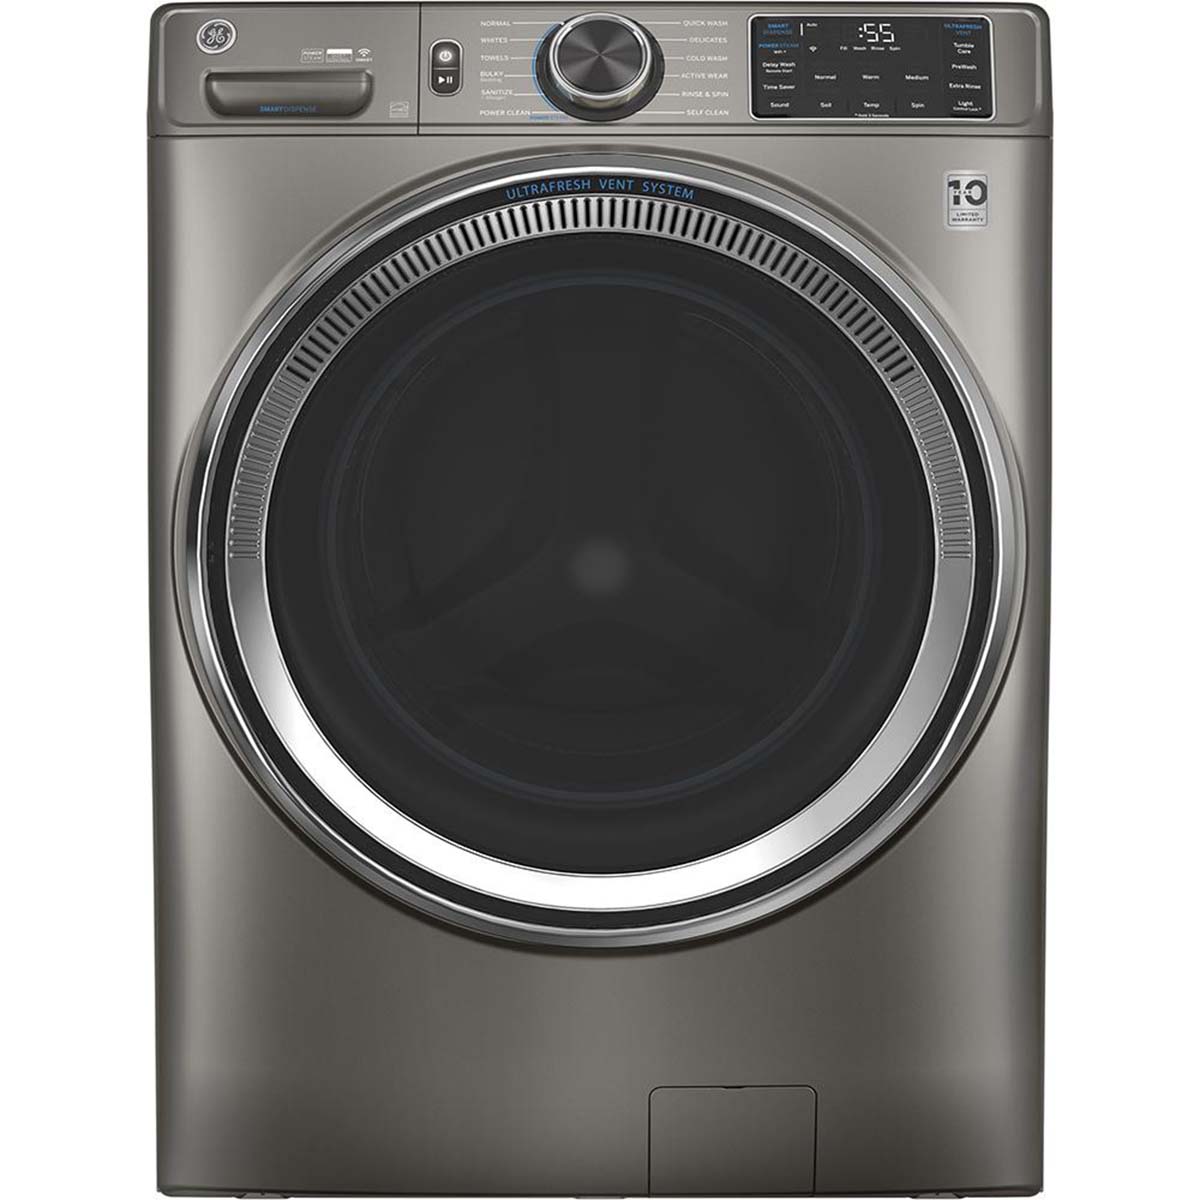 How To Fix The Error Code E97 For GE Washing Machine